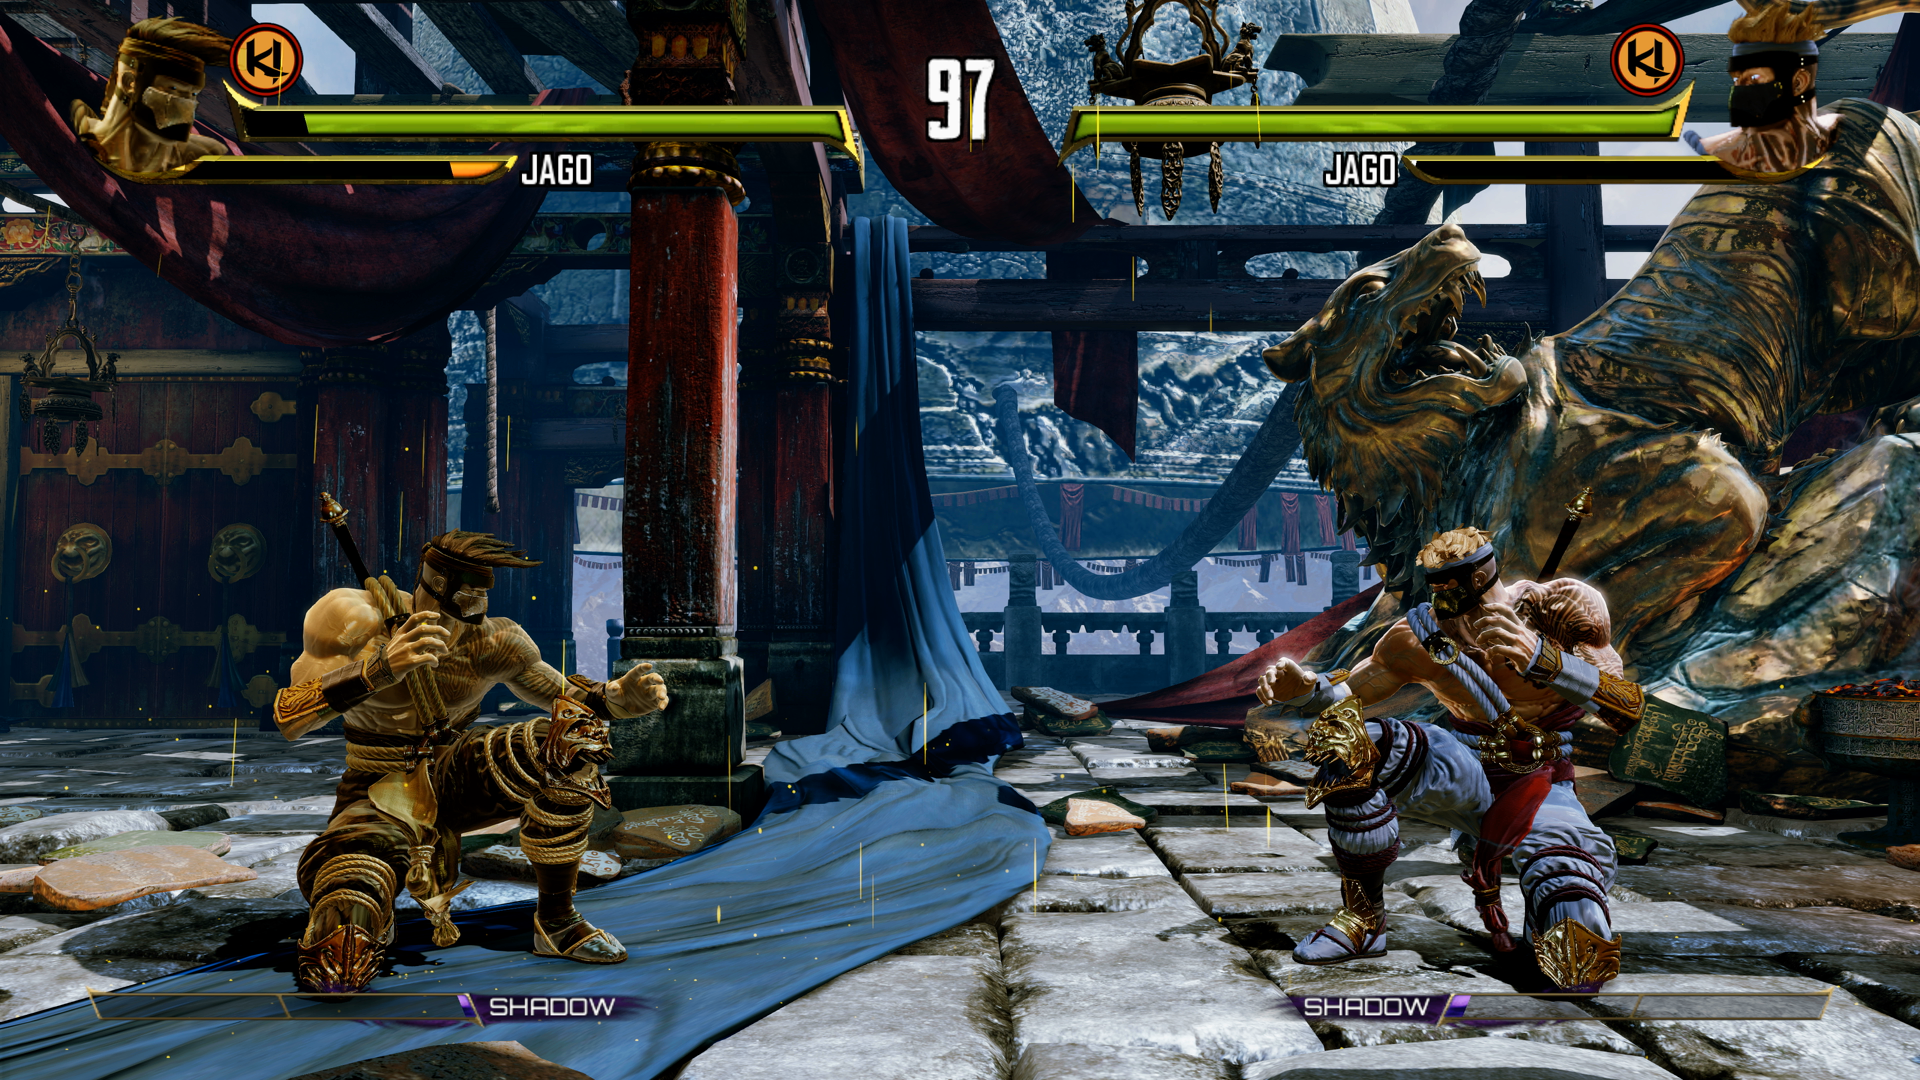 A battle between two characters in Killer Instinct. They're squatting with fists up on opposite sides of the arena. 